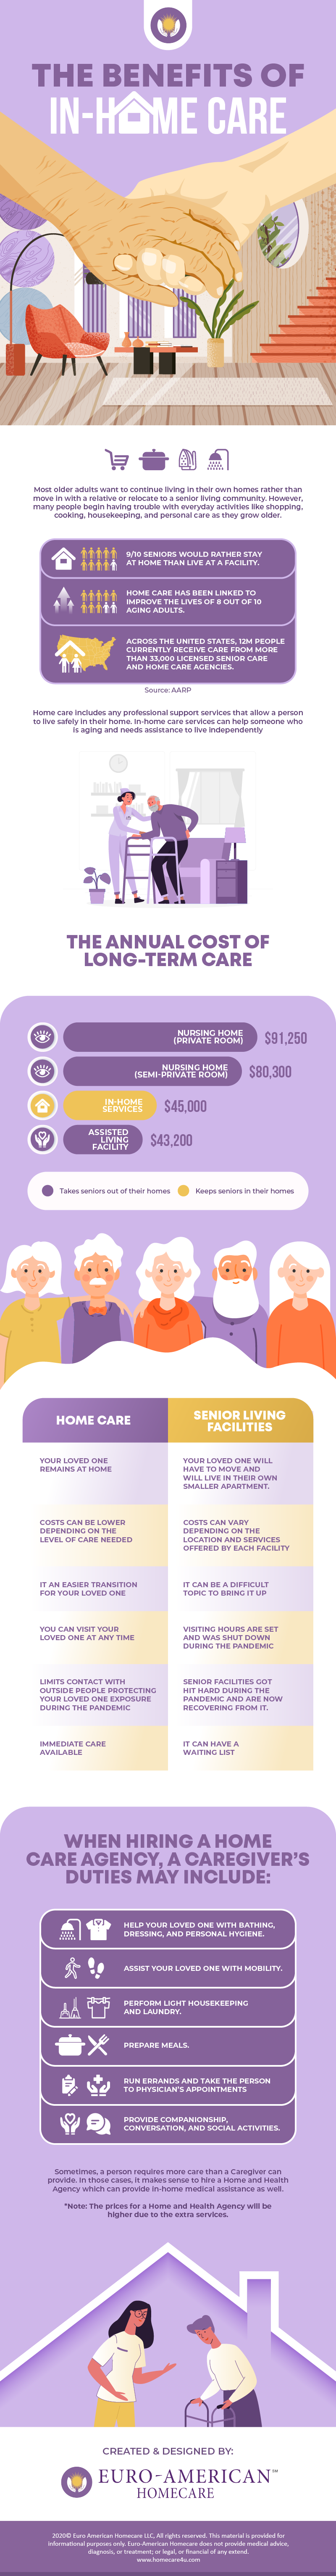 The Benefits of In-Home Care-01 infographic Euro-american homecare